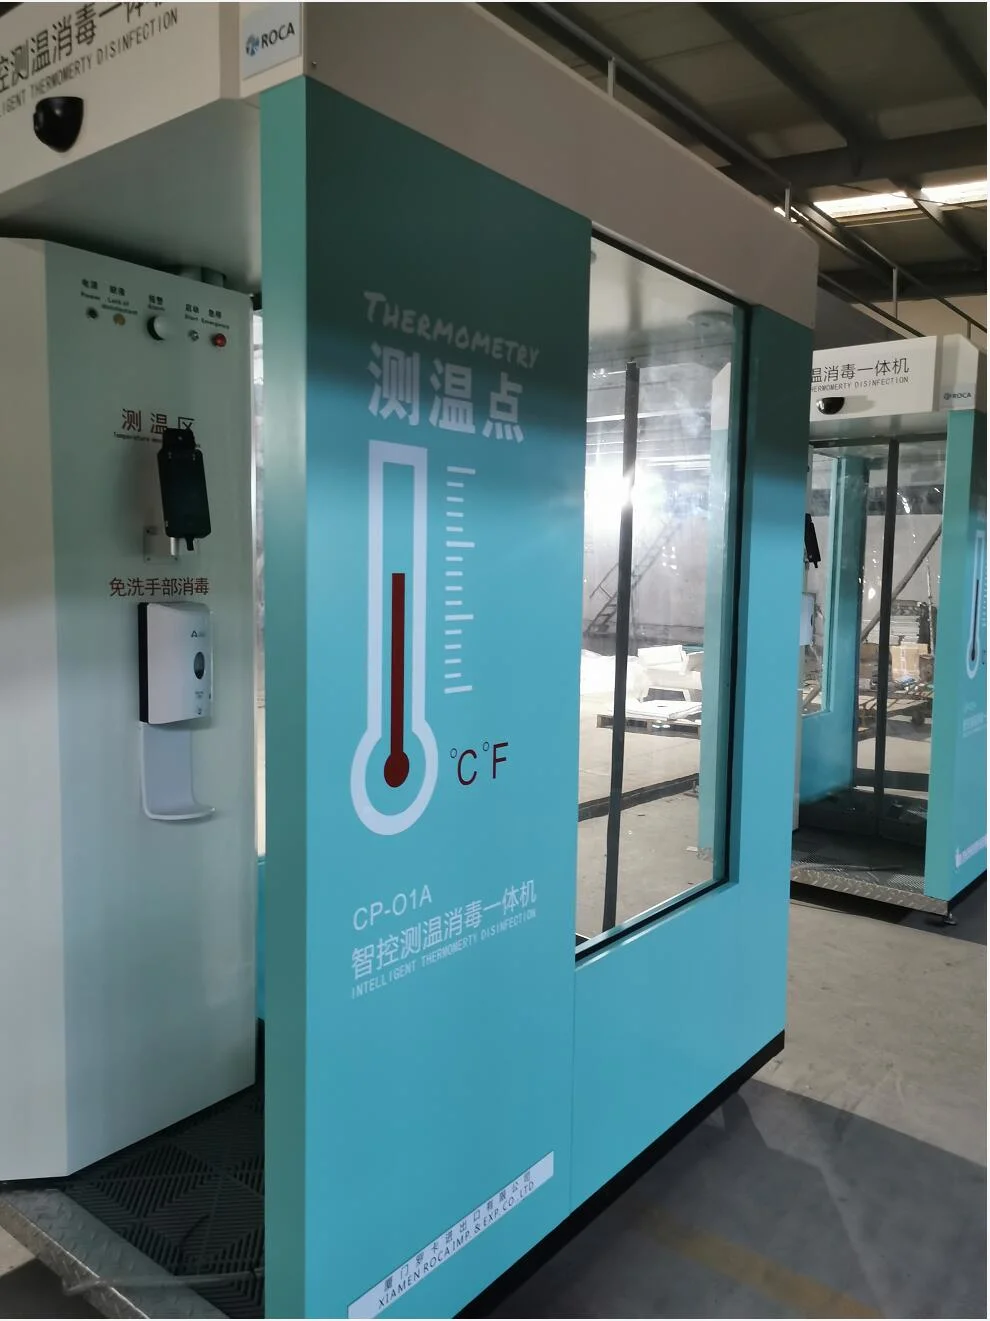 Disinfection Cabinet Ultrasonic Atomization Disinfection